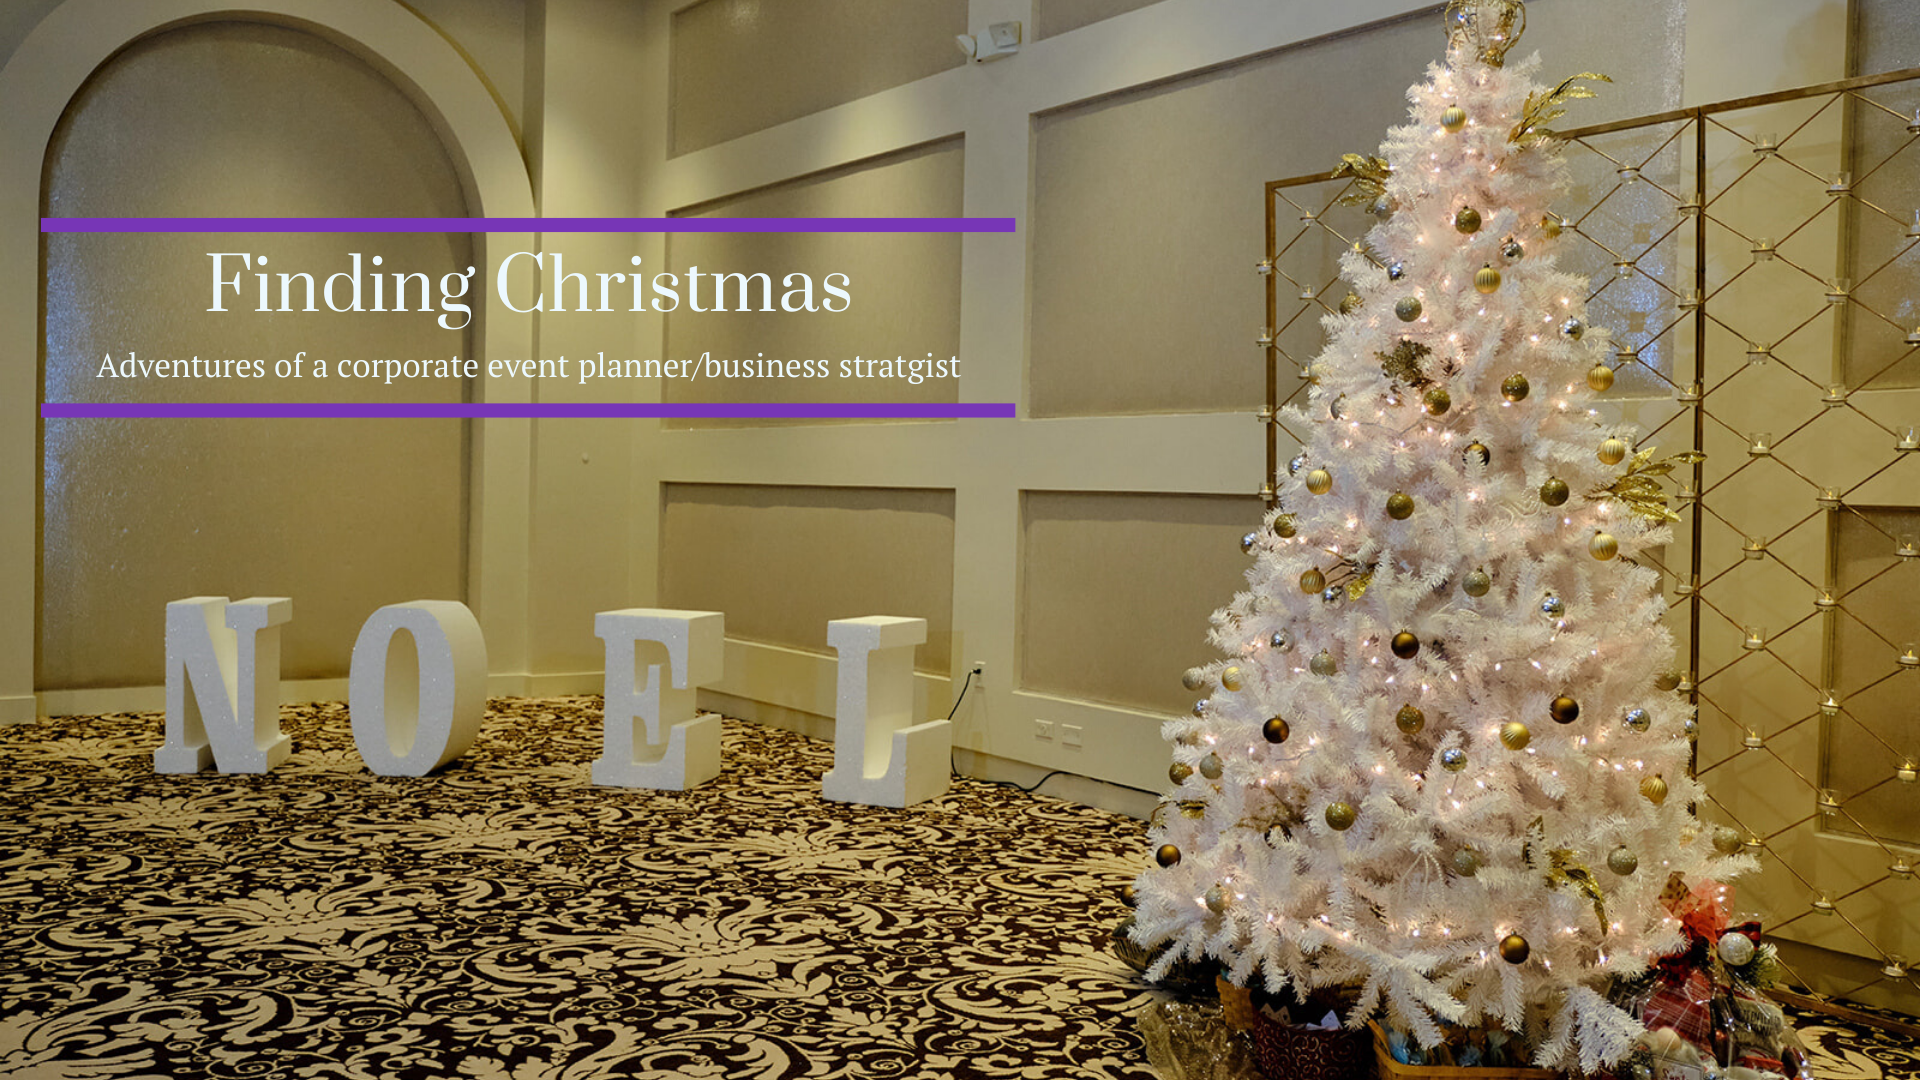 Cover art for Christmas Blog Post. Includes Christmas decor, trees, NOEL sign, at Chateau Luxe venue in Phoenix AZ